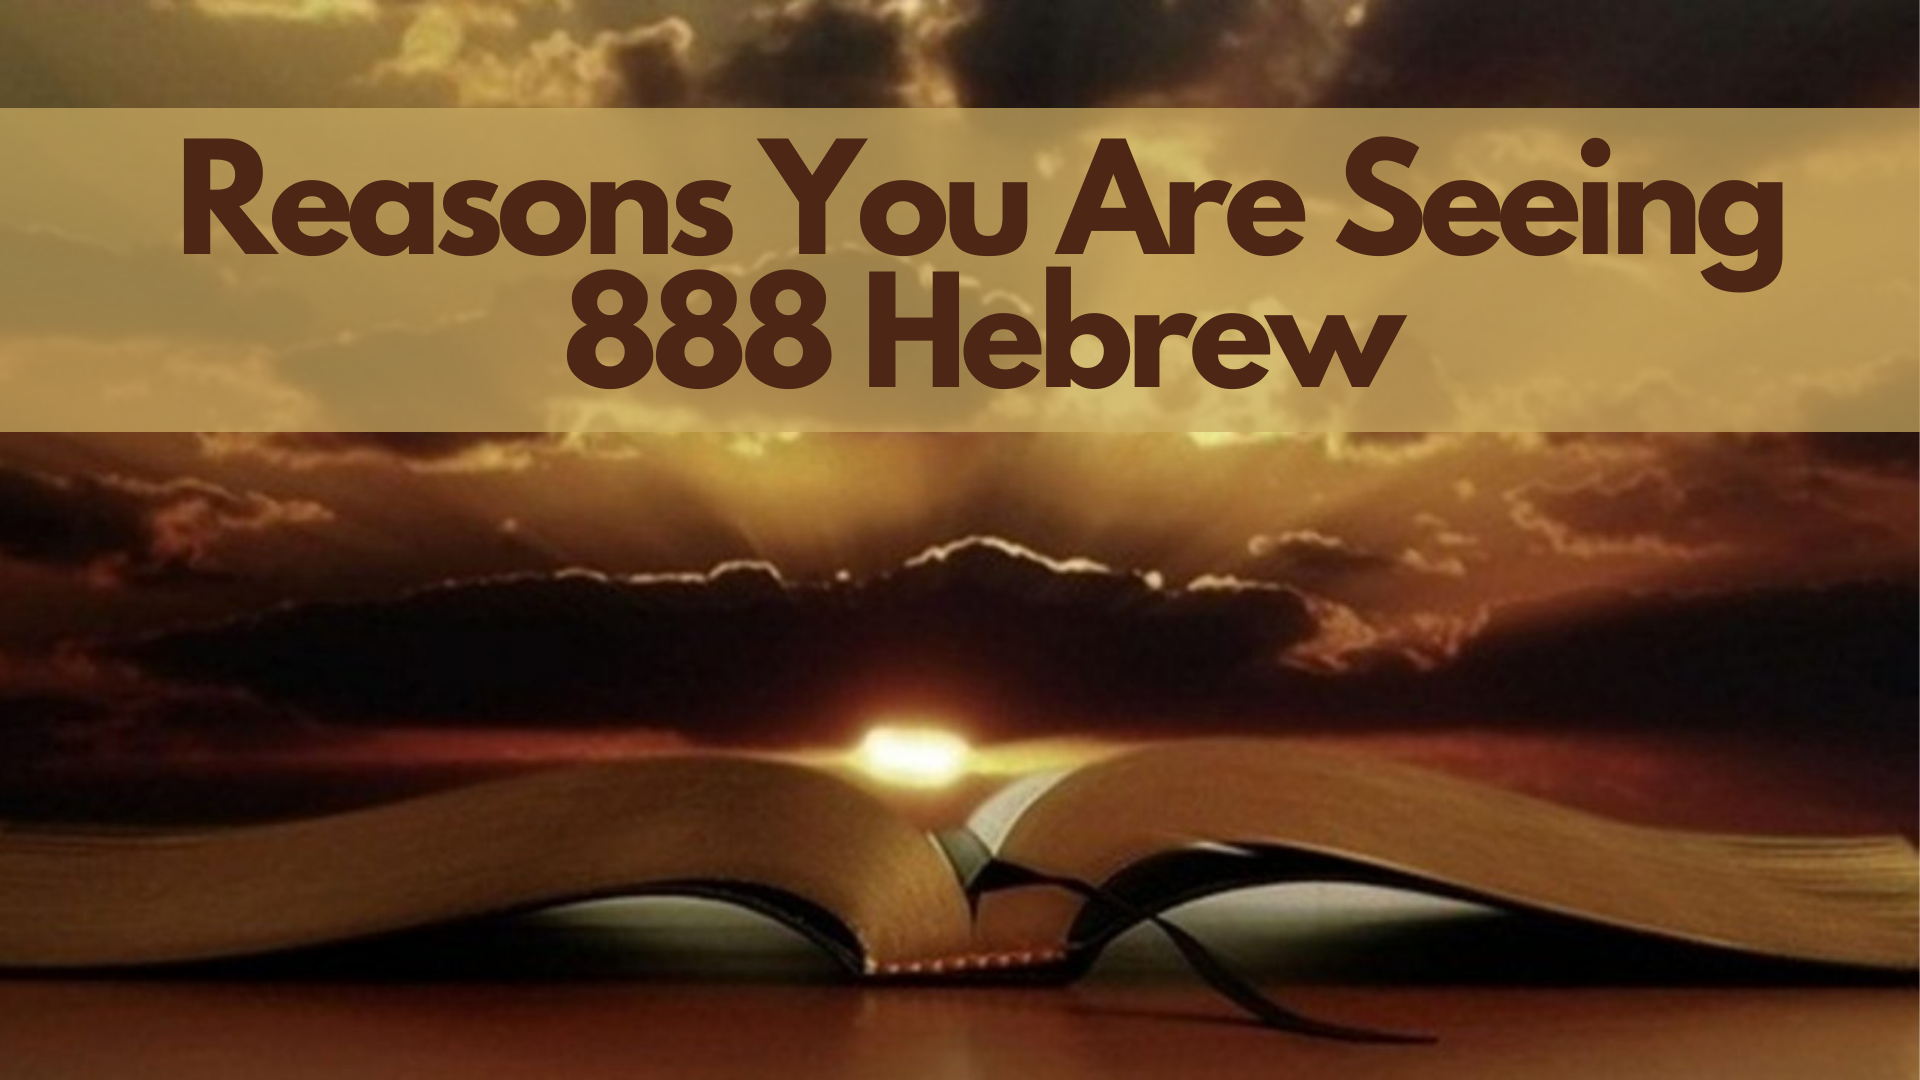 A Bible showing the sunset on its background with words Reasons You Are Seeing 888 Hebrew